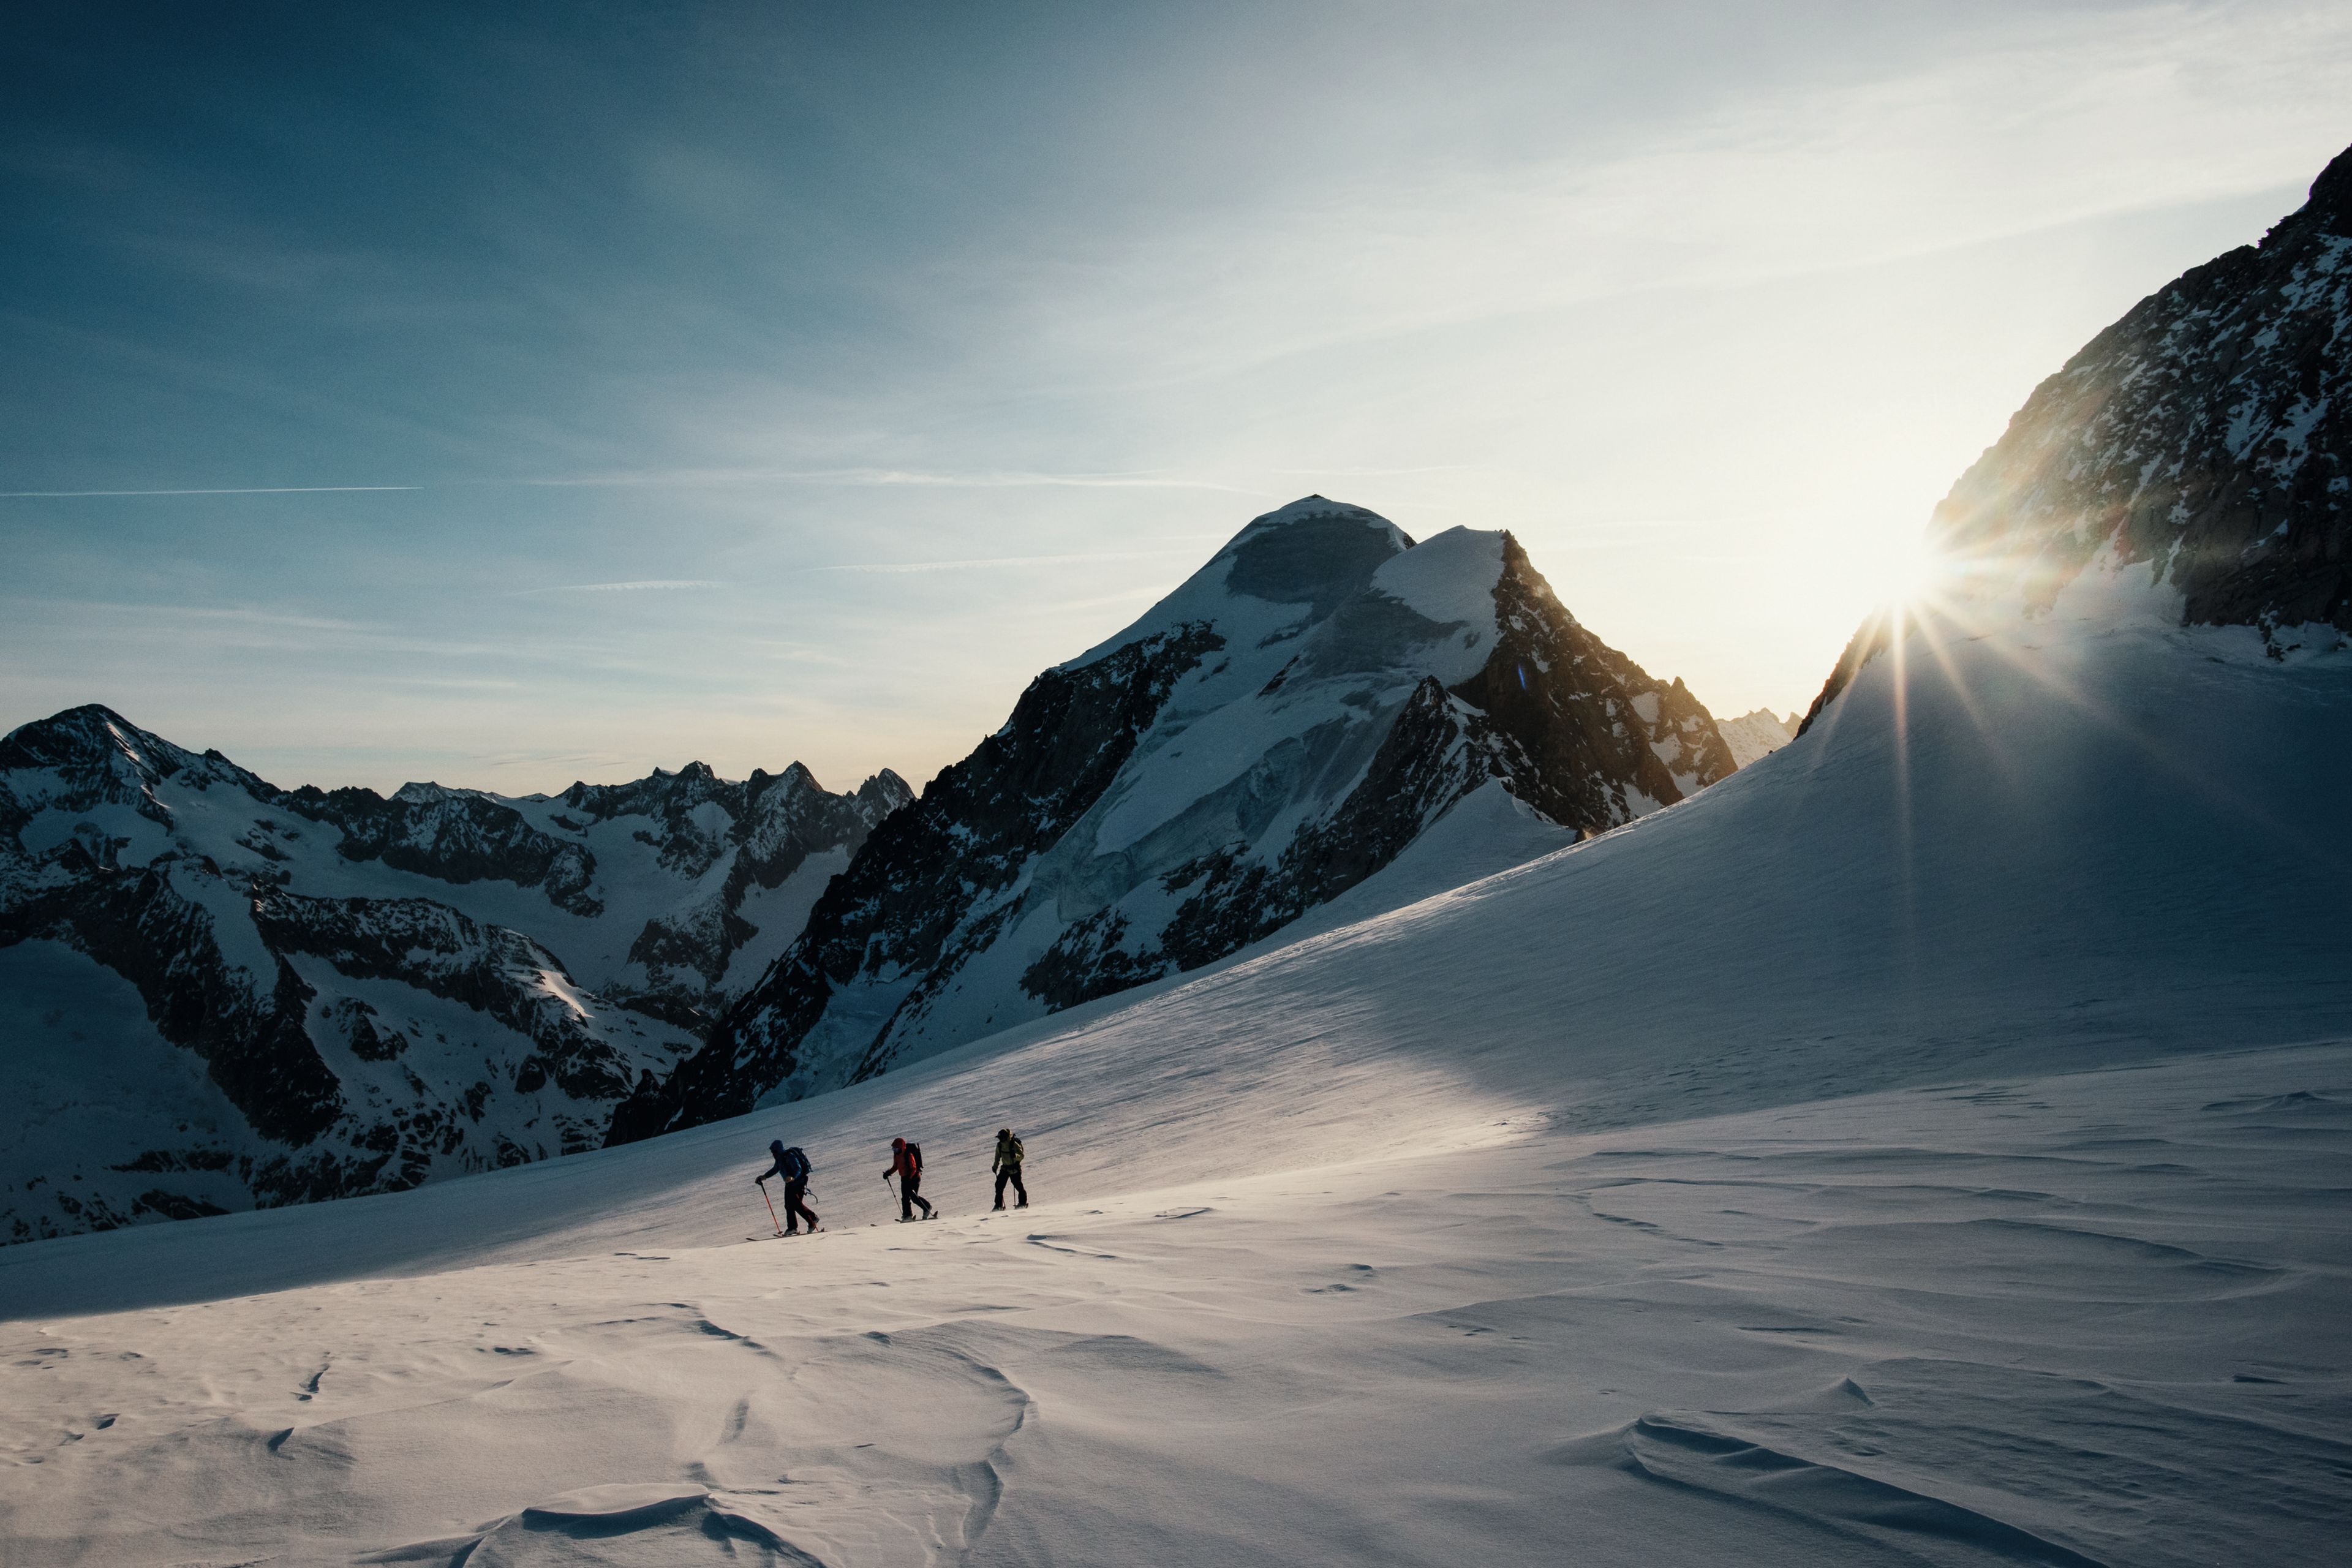 The sun rises on hikers in the Lötschental